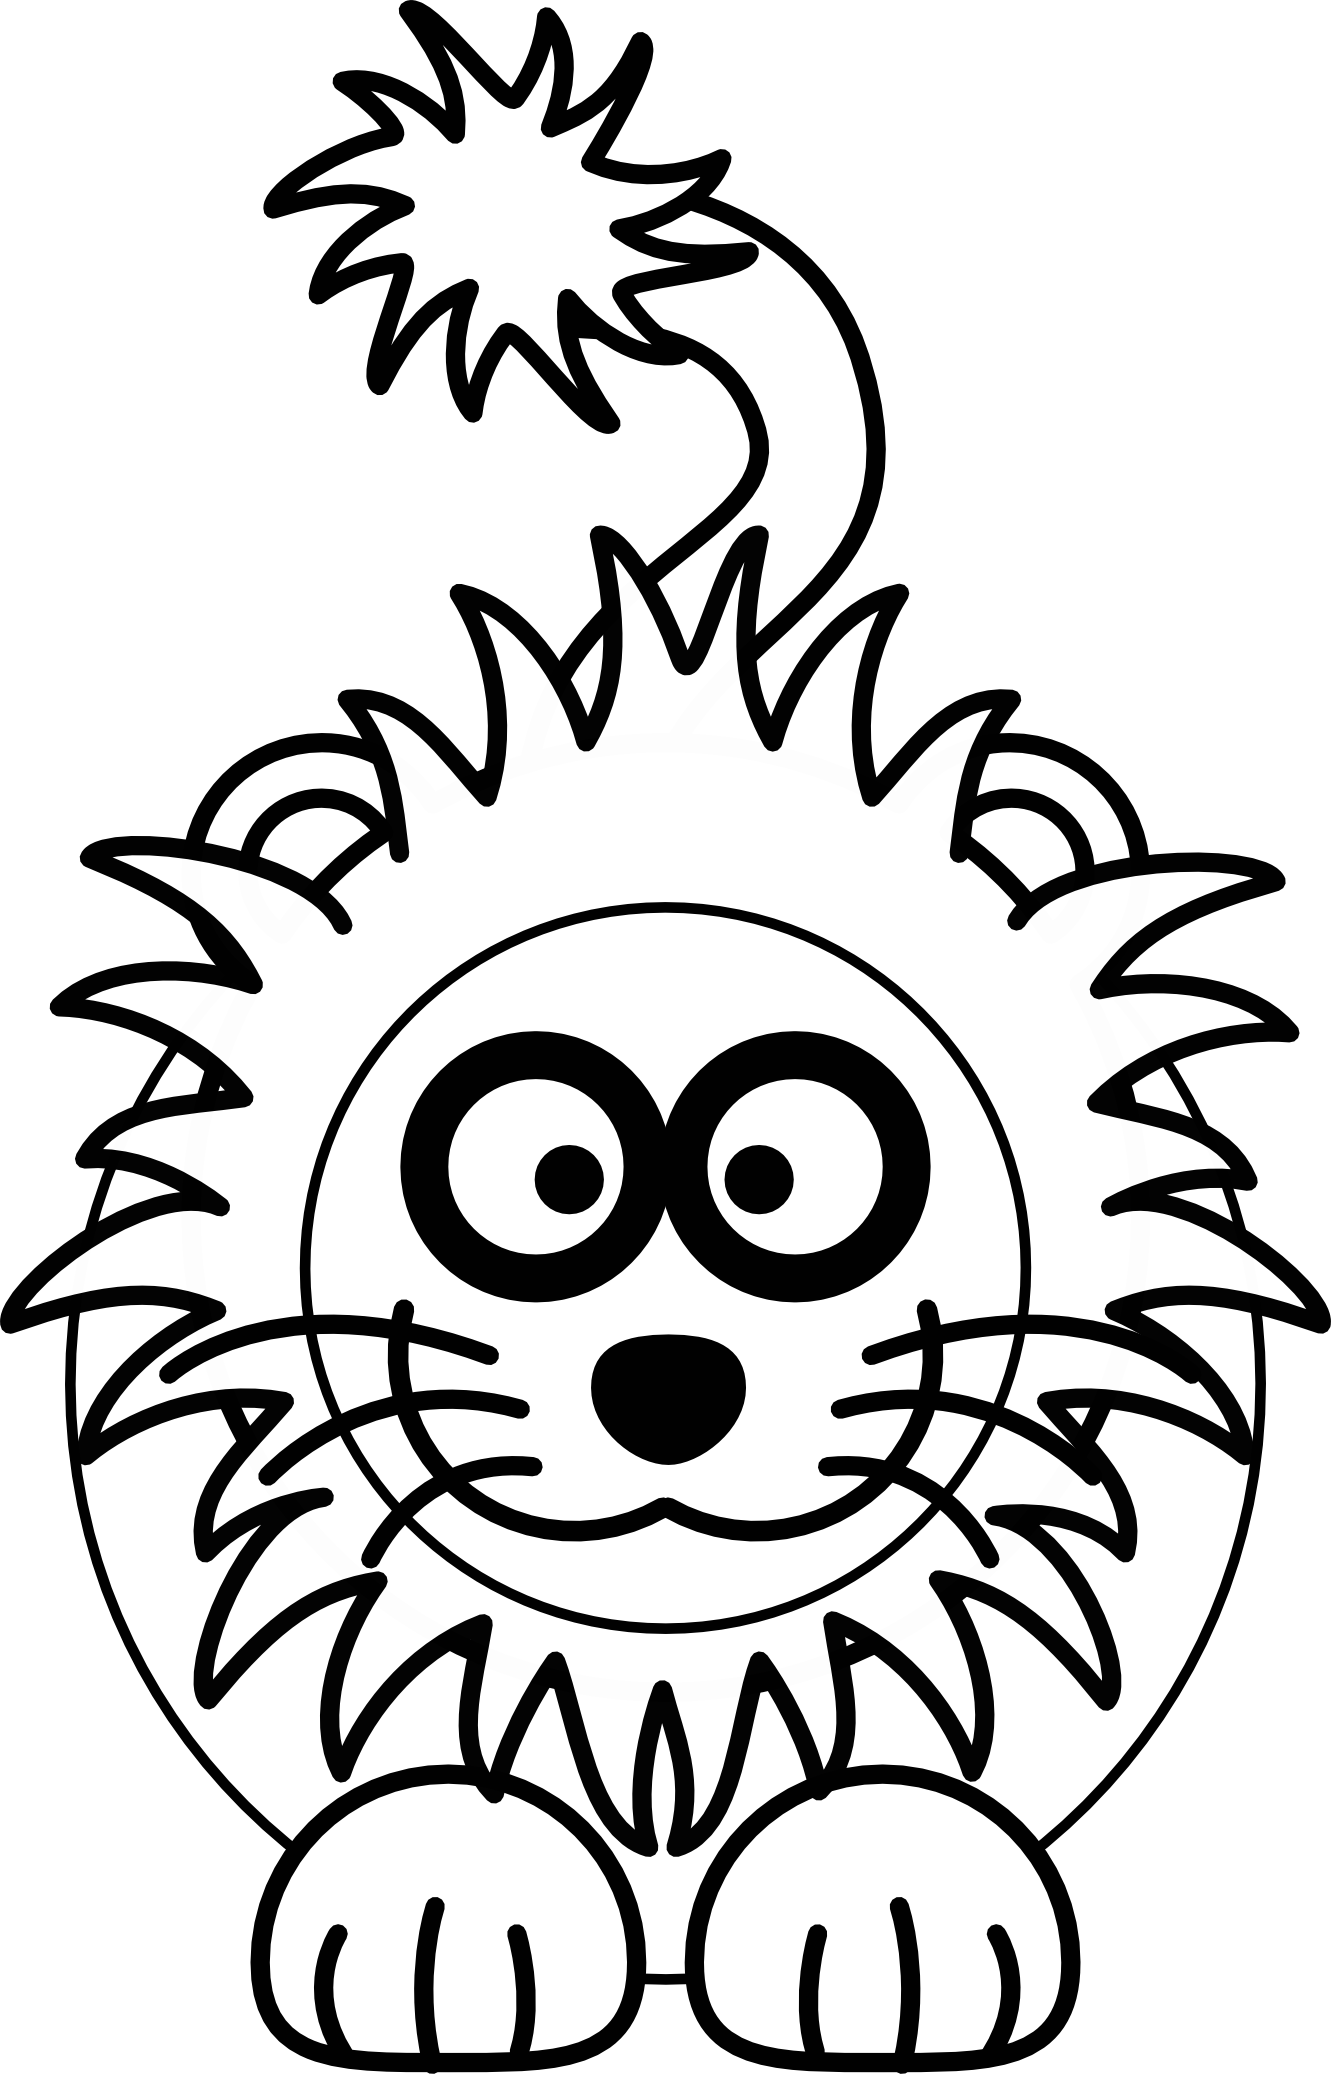 Cartoon Lion To Draw - Clipart library